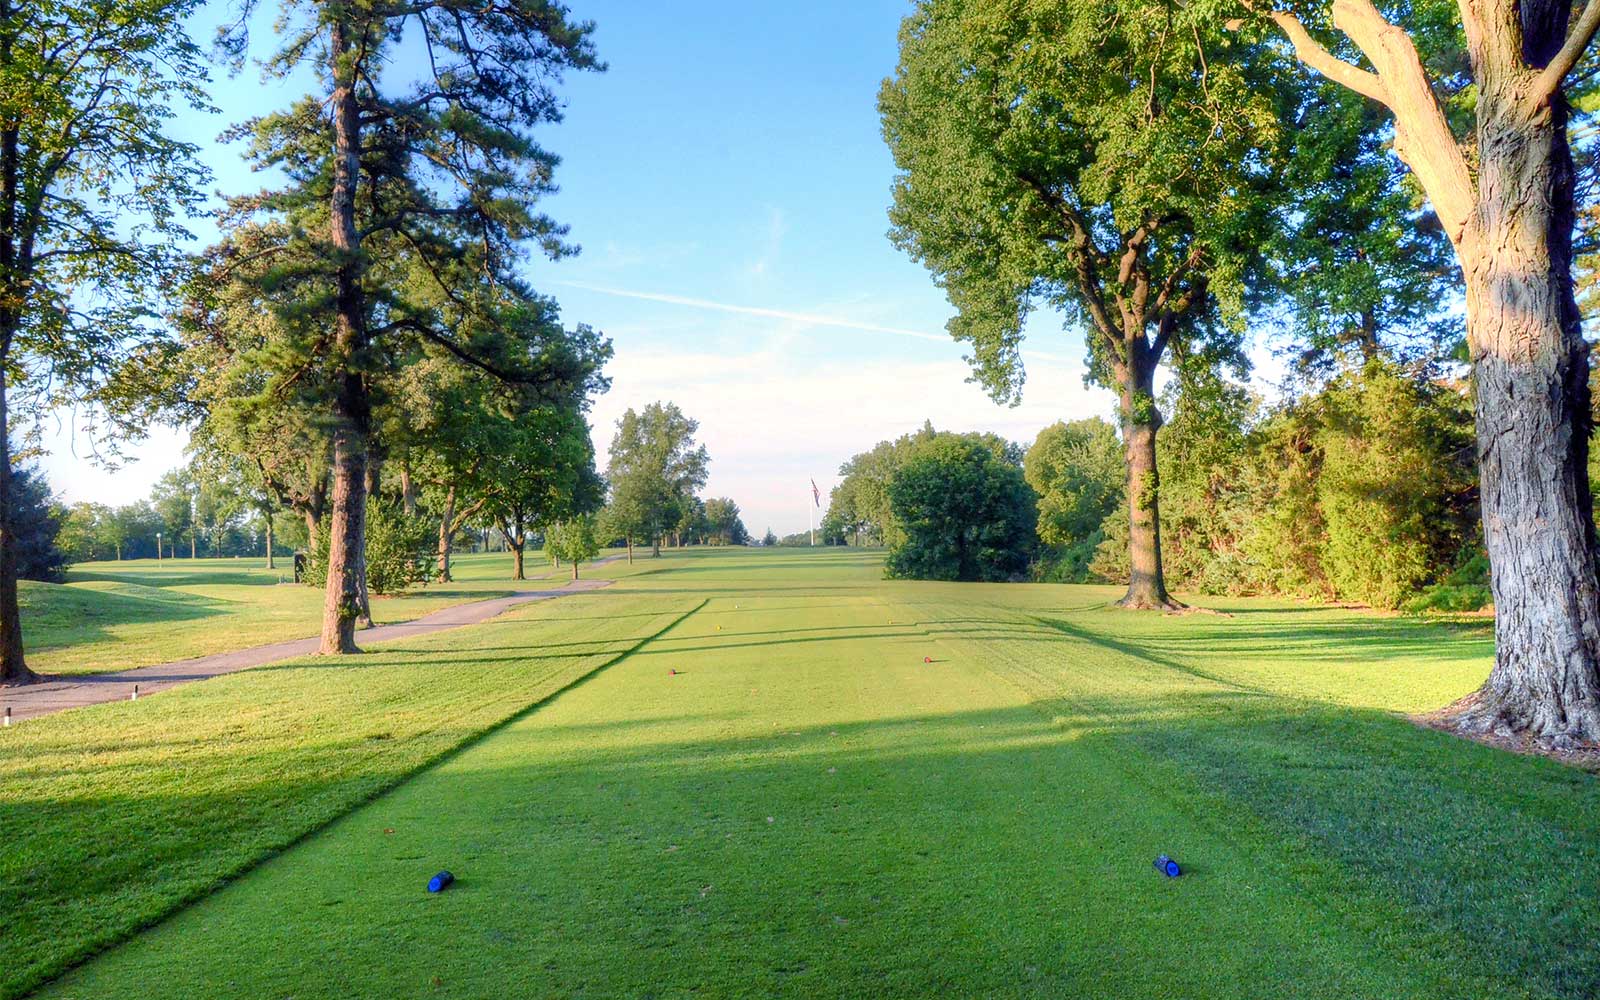 Sunset Country Club | Best Golf Courses in St. Louis, Missouri | Reviews of Missouri Golf Courses